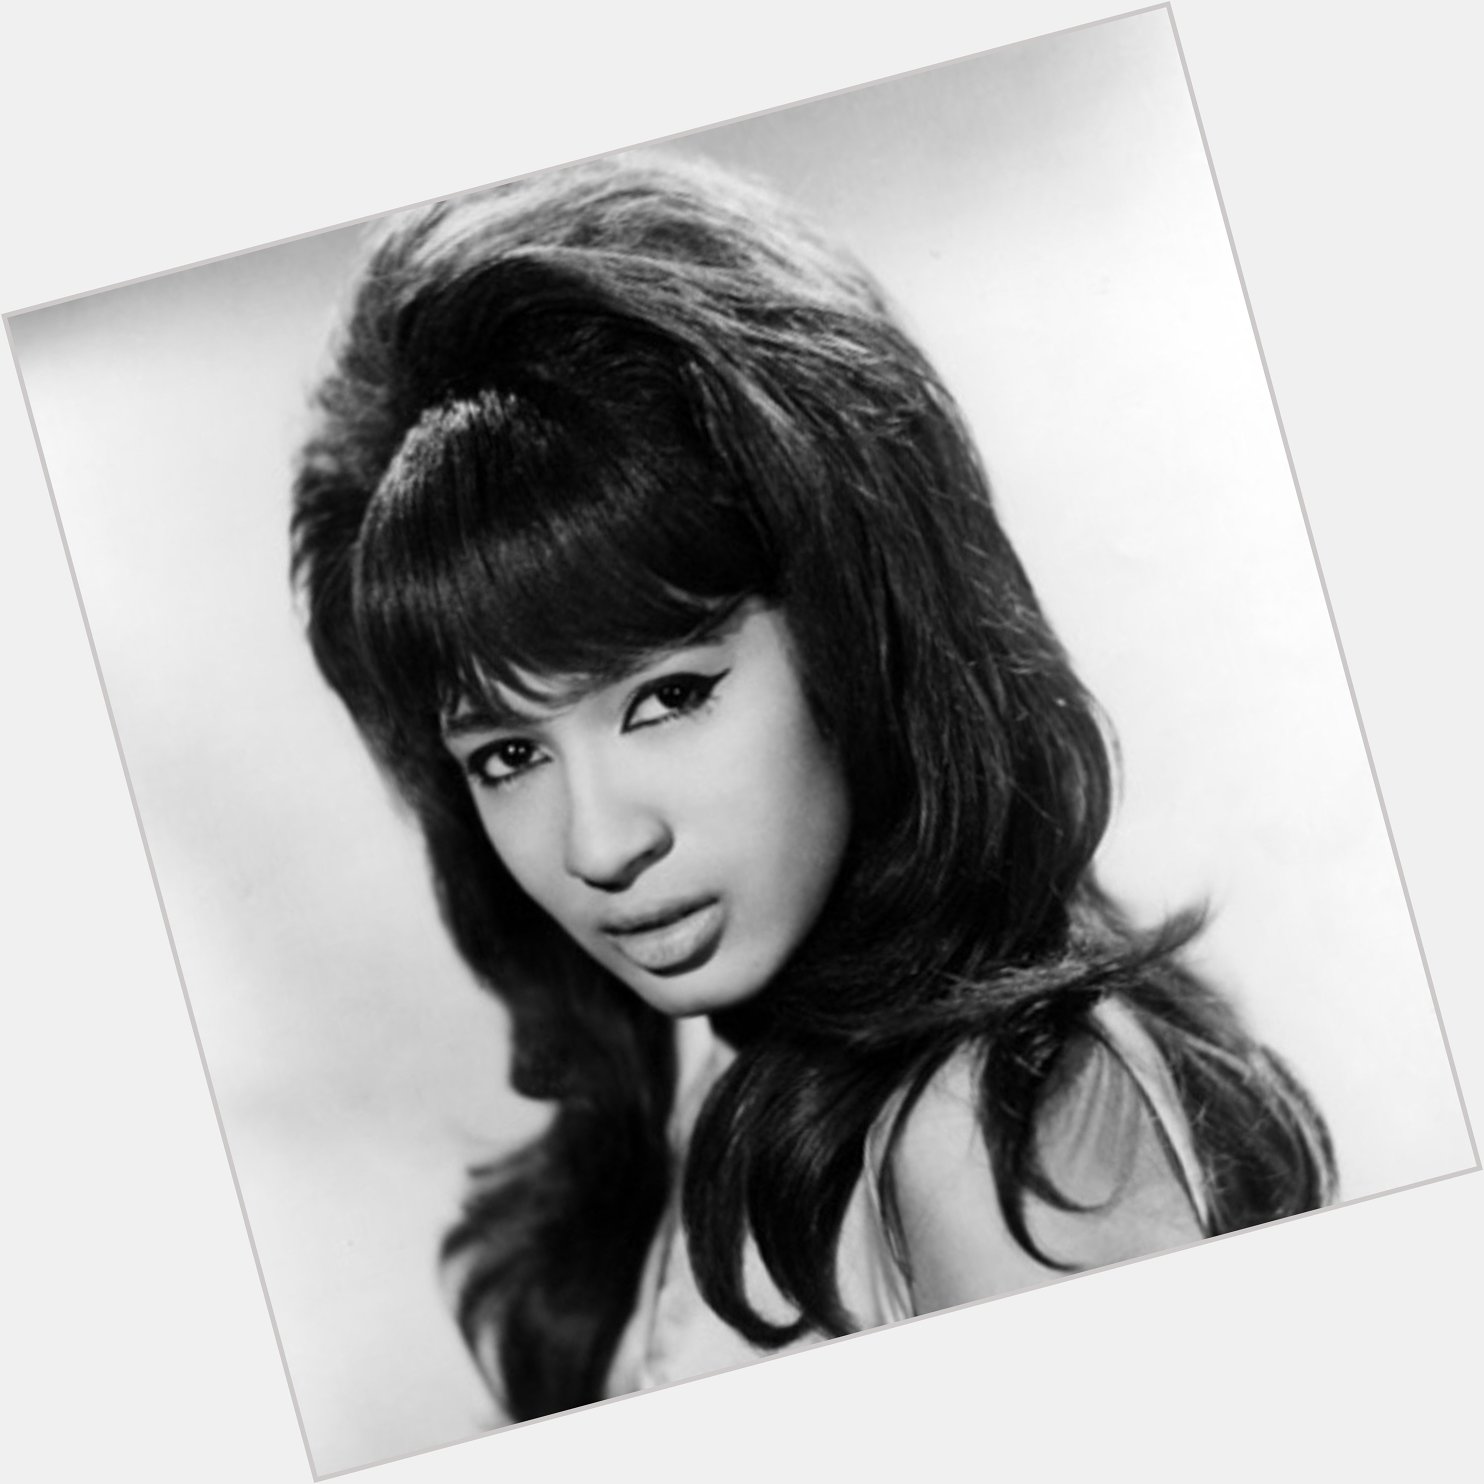 Be my baby. Ronnie Spector turns 74 years old today. Happy birthday!  